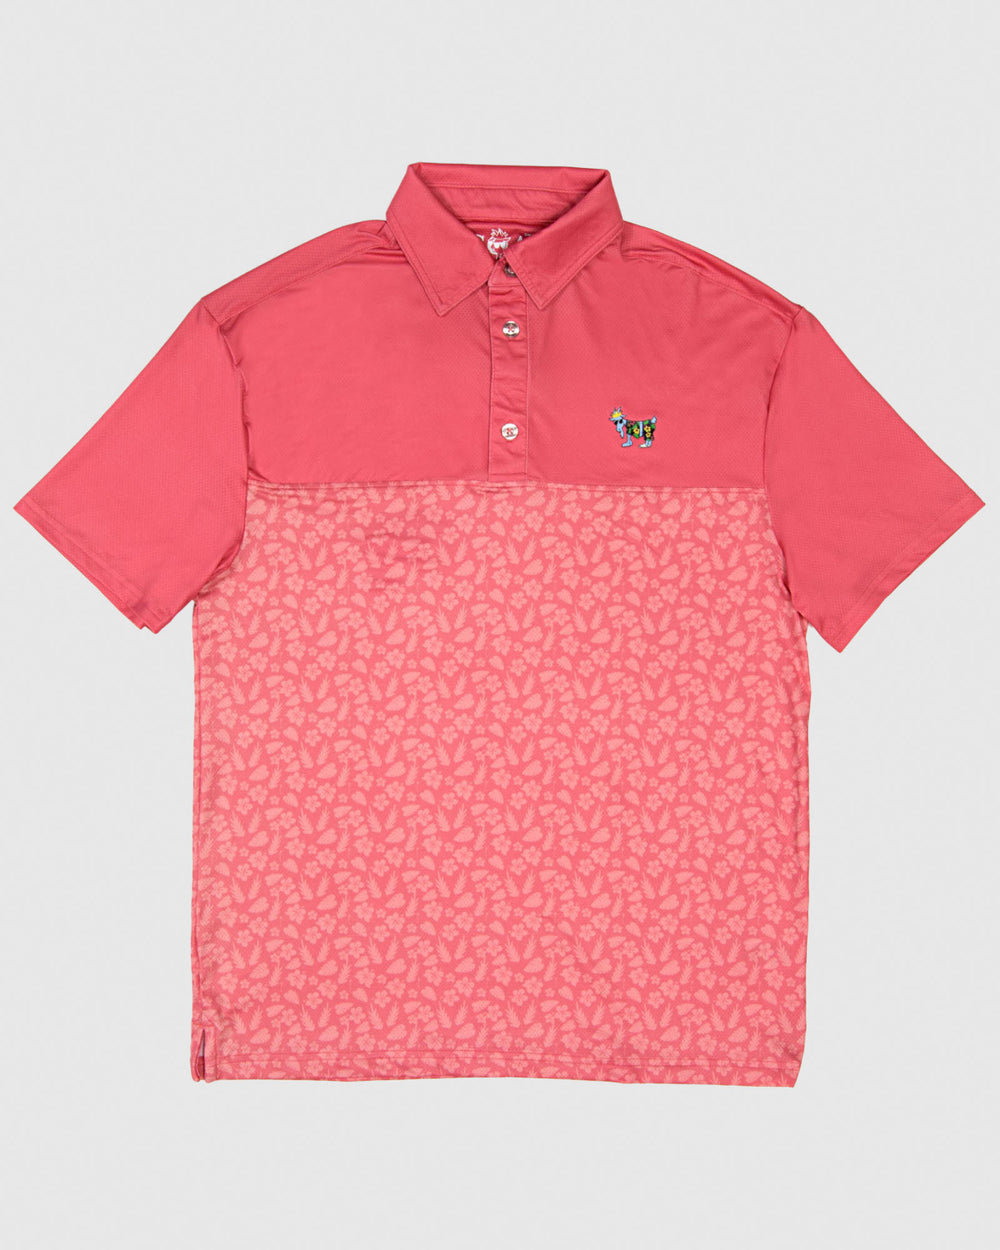 Salmon polo with vacation goat and subtle floral print